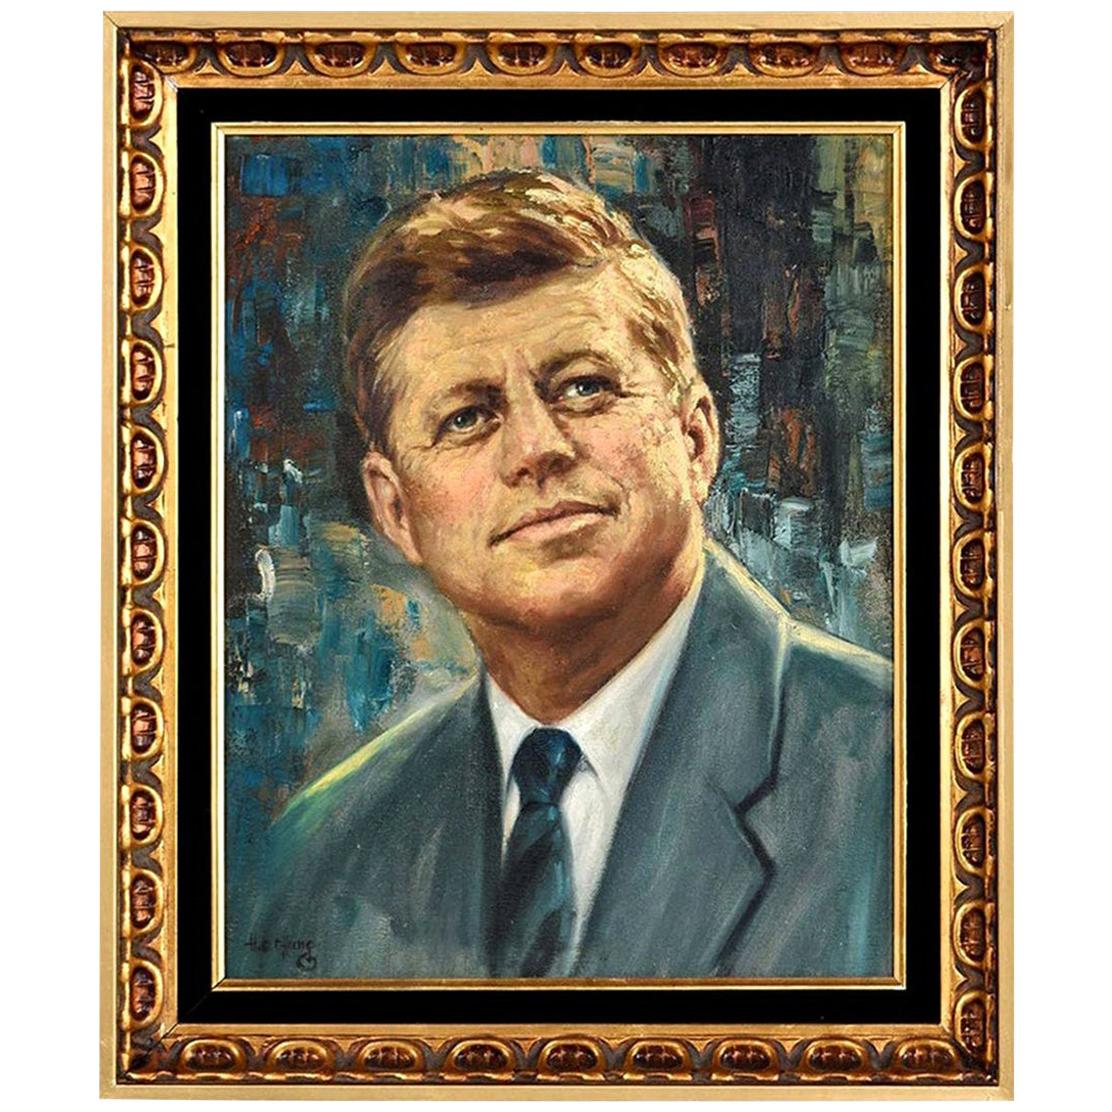 John F. Kennedy Modernist Abstract Presidential Portrait Signed H.E. Chung 1960s